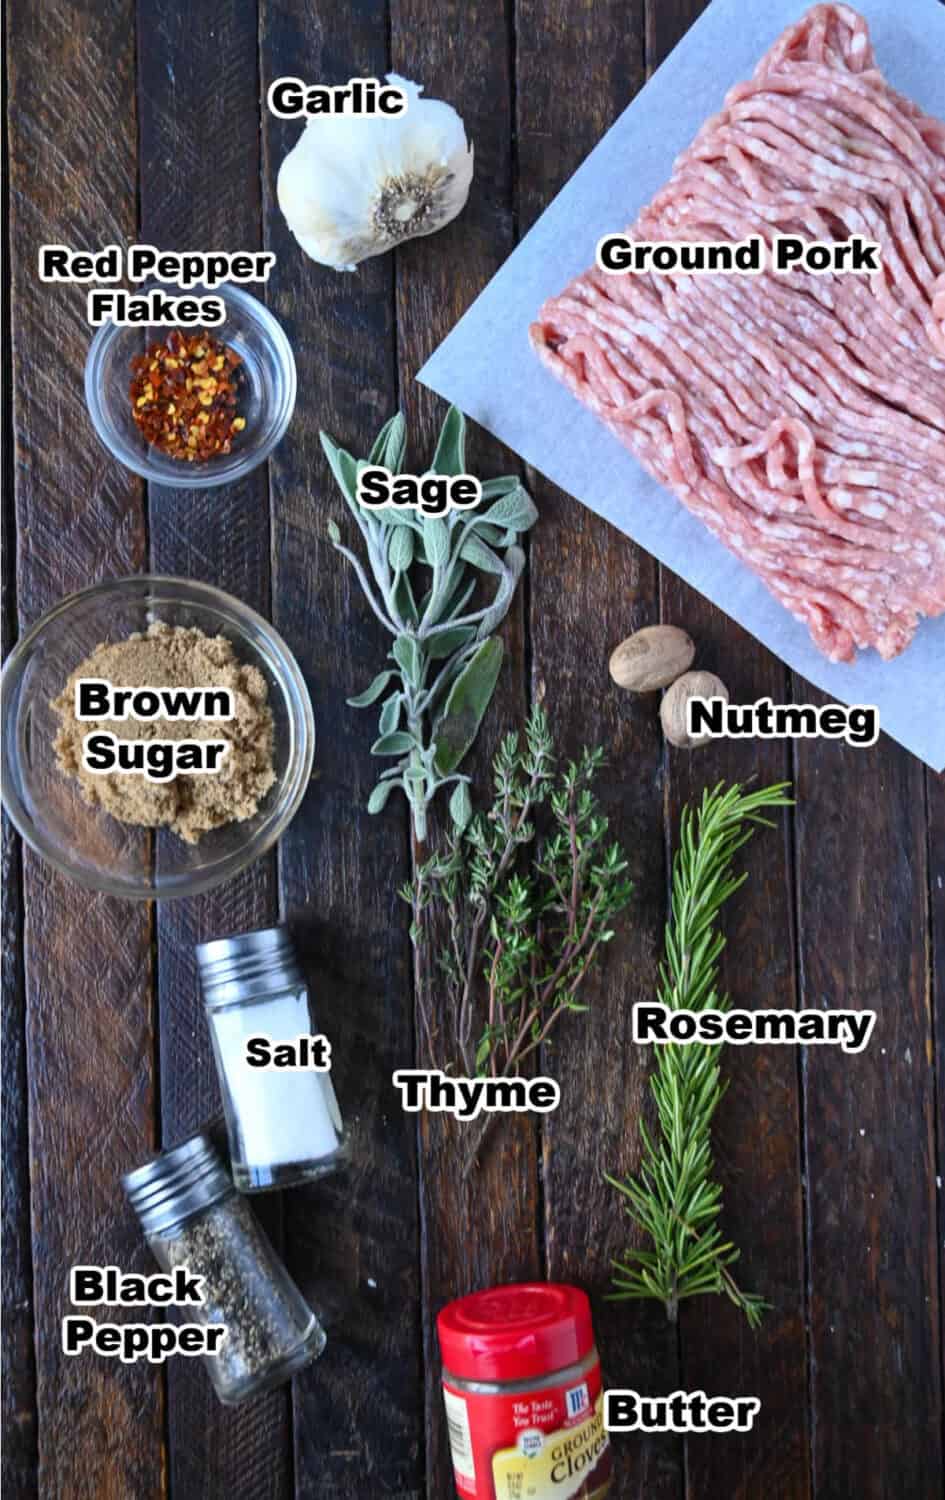 Ingredients needed for this recipe.